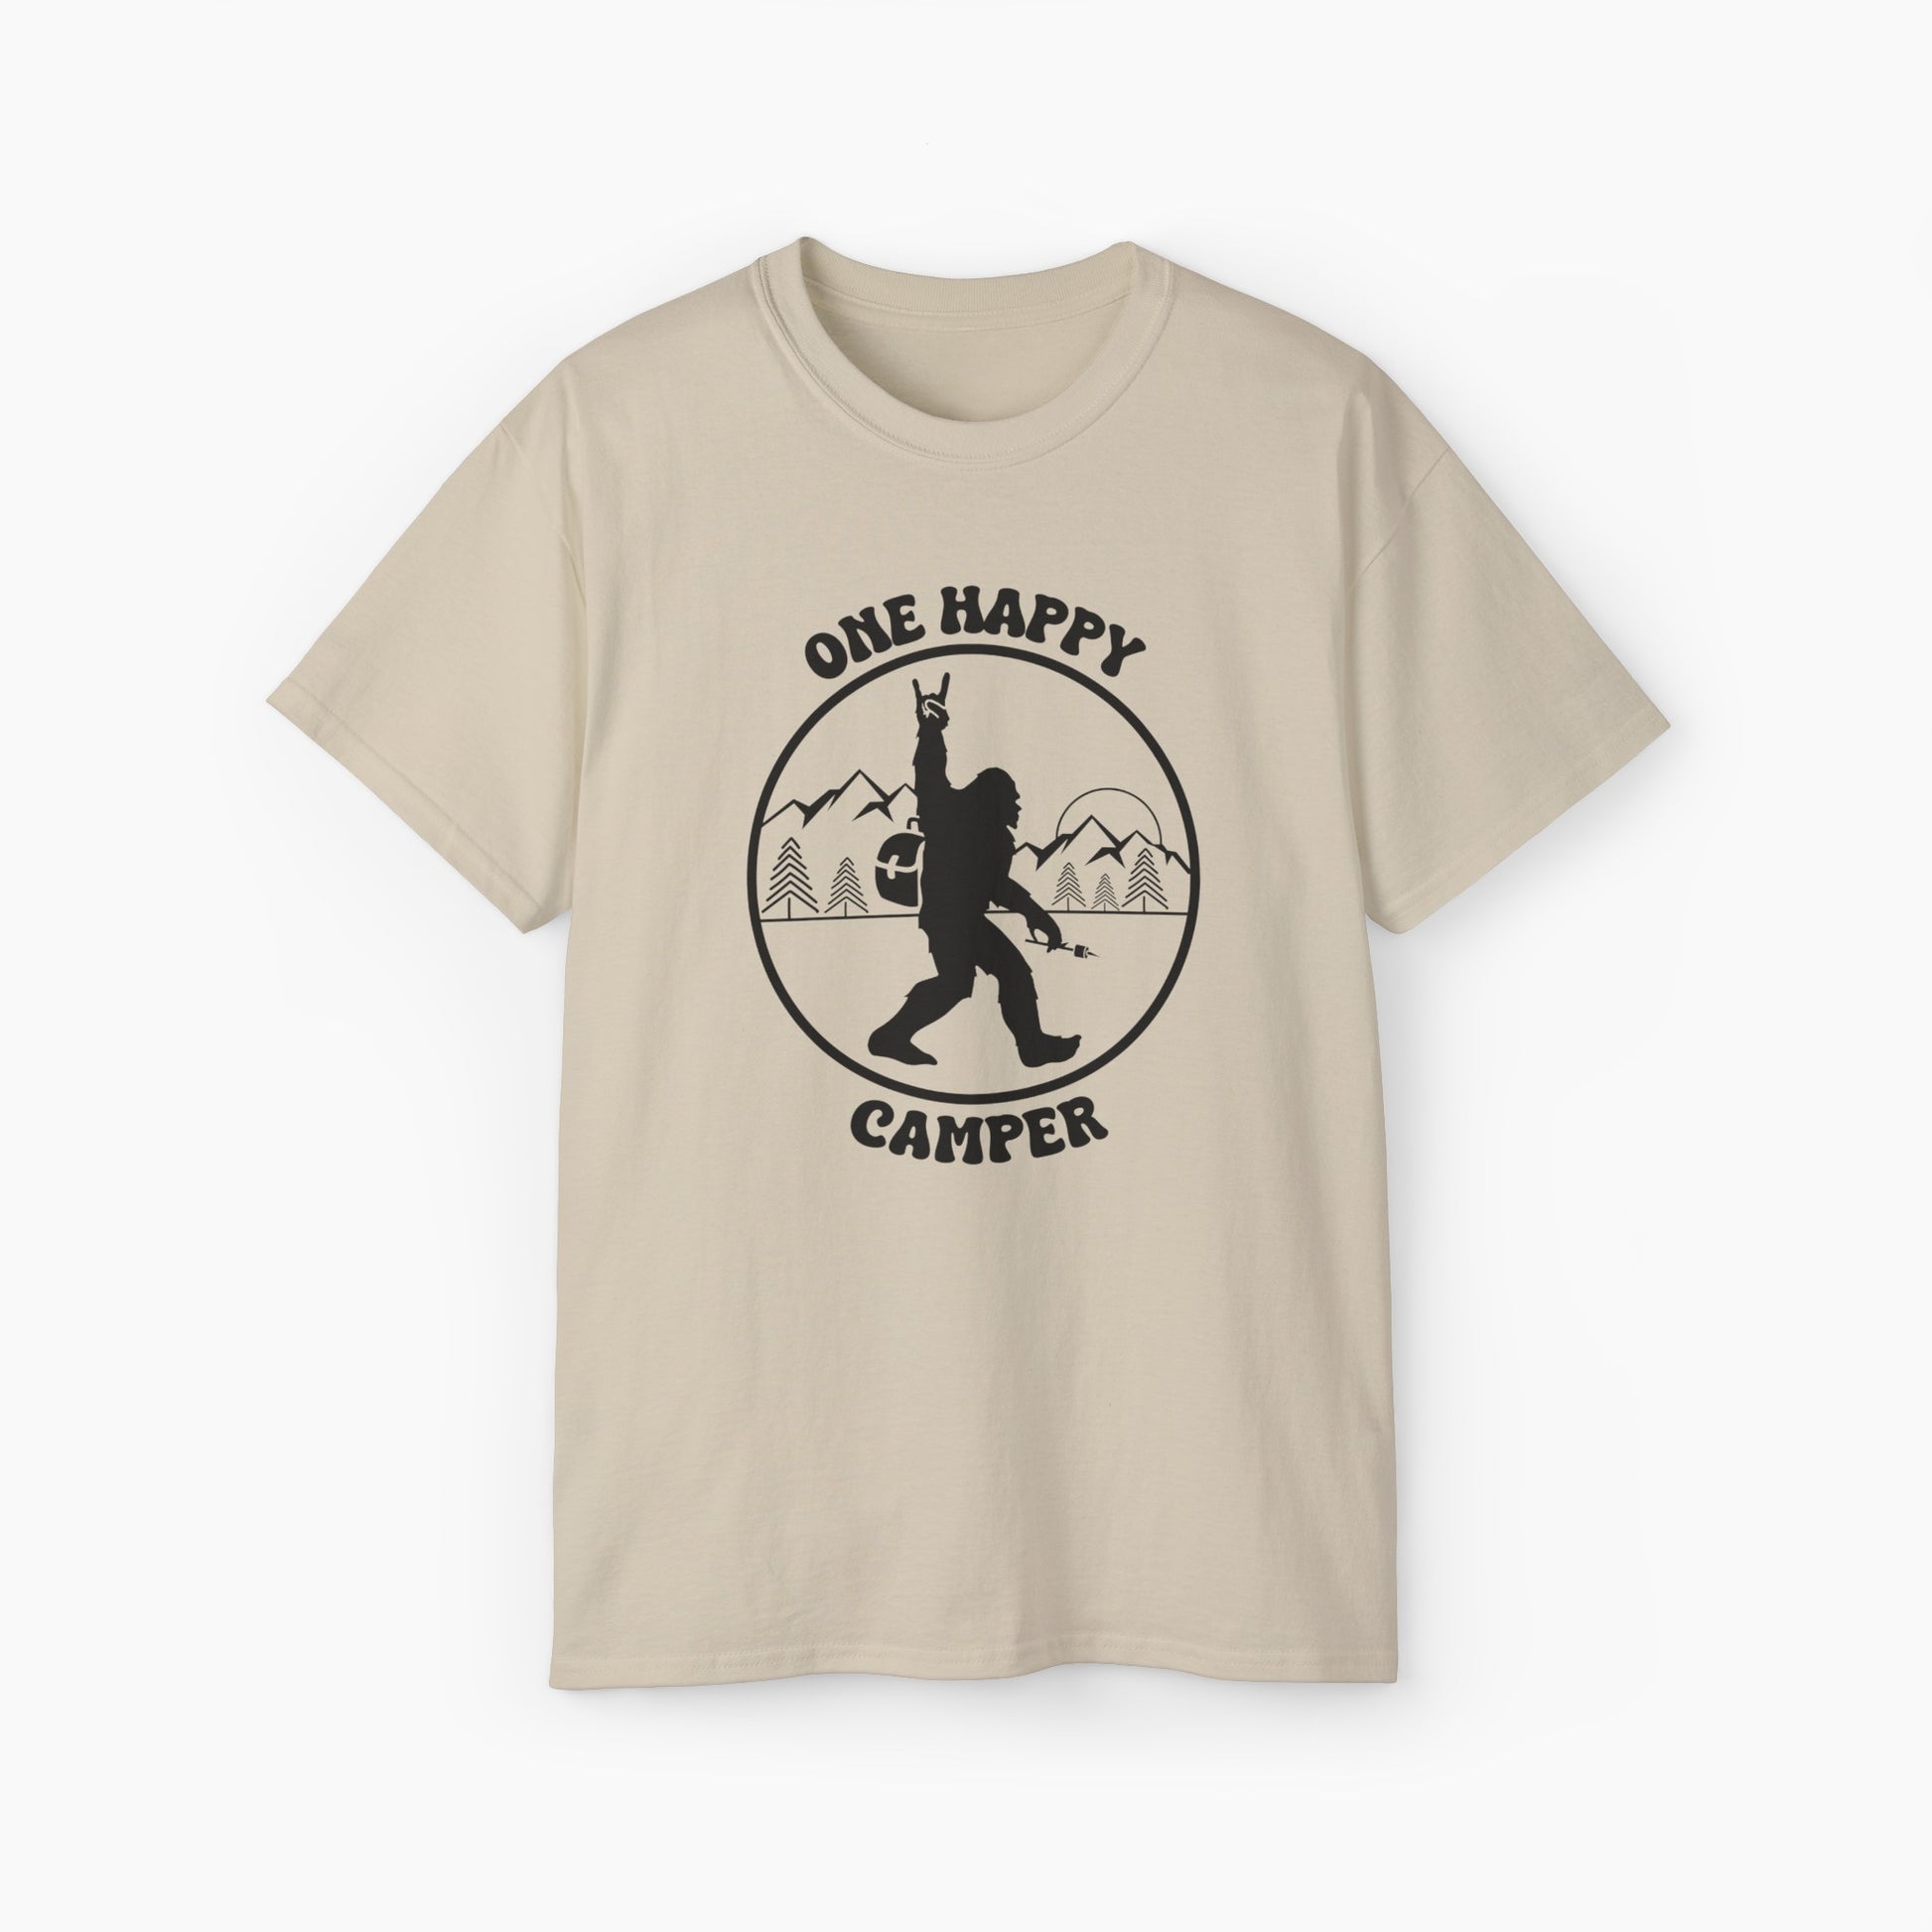 Sand color t-shirt with 'One Happy Camper' text, featuring Bigfoot making a peace sign, set against a subtle background of trees and mountains.